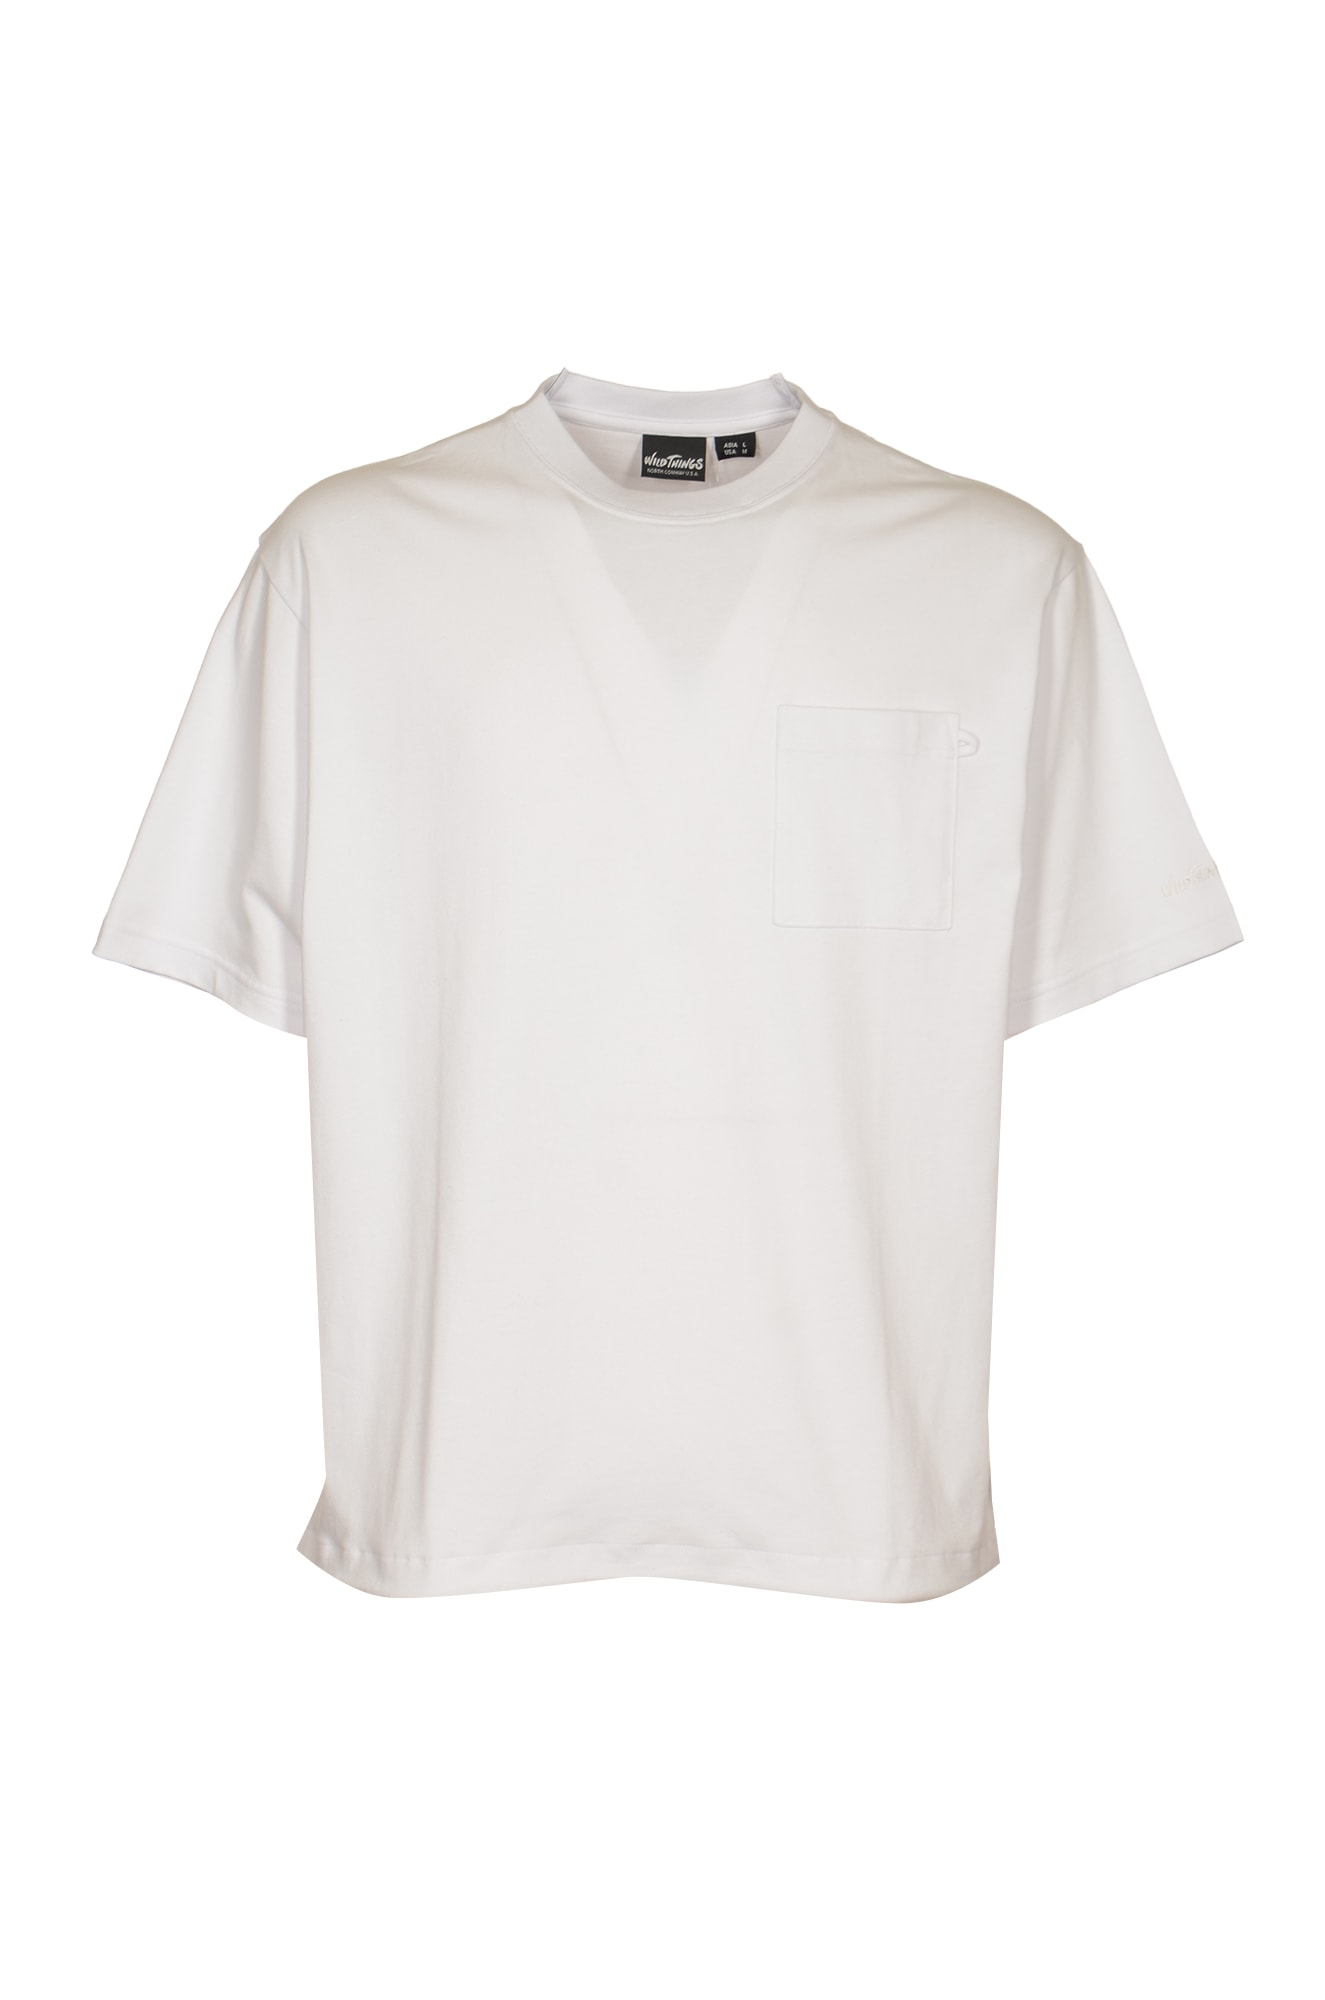 Wild Things City Pocket T-shirt In White